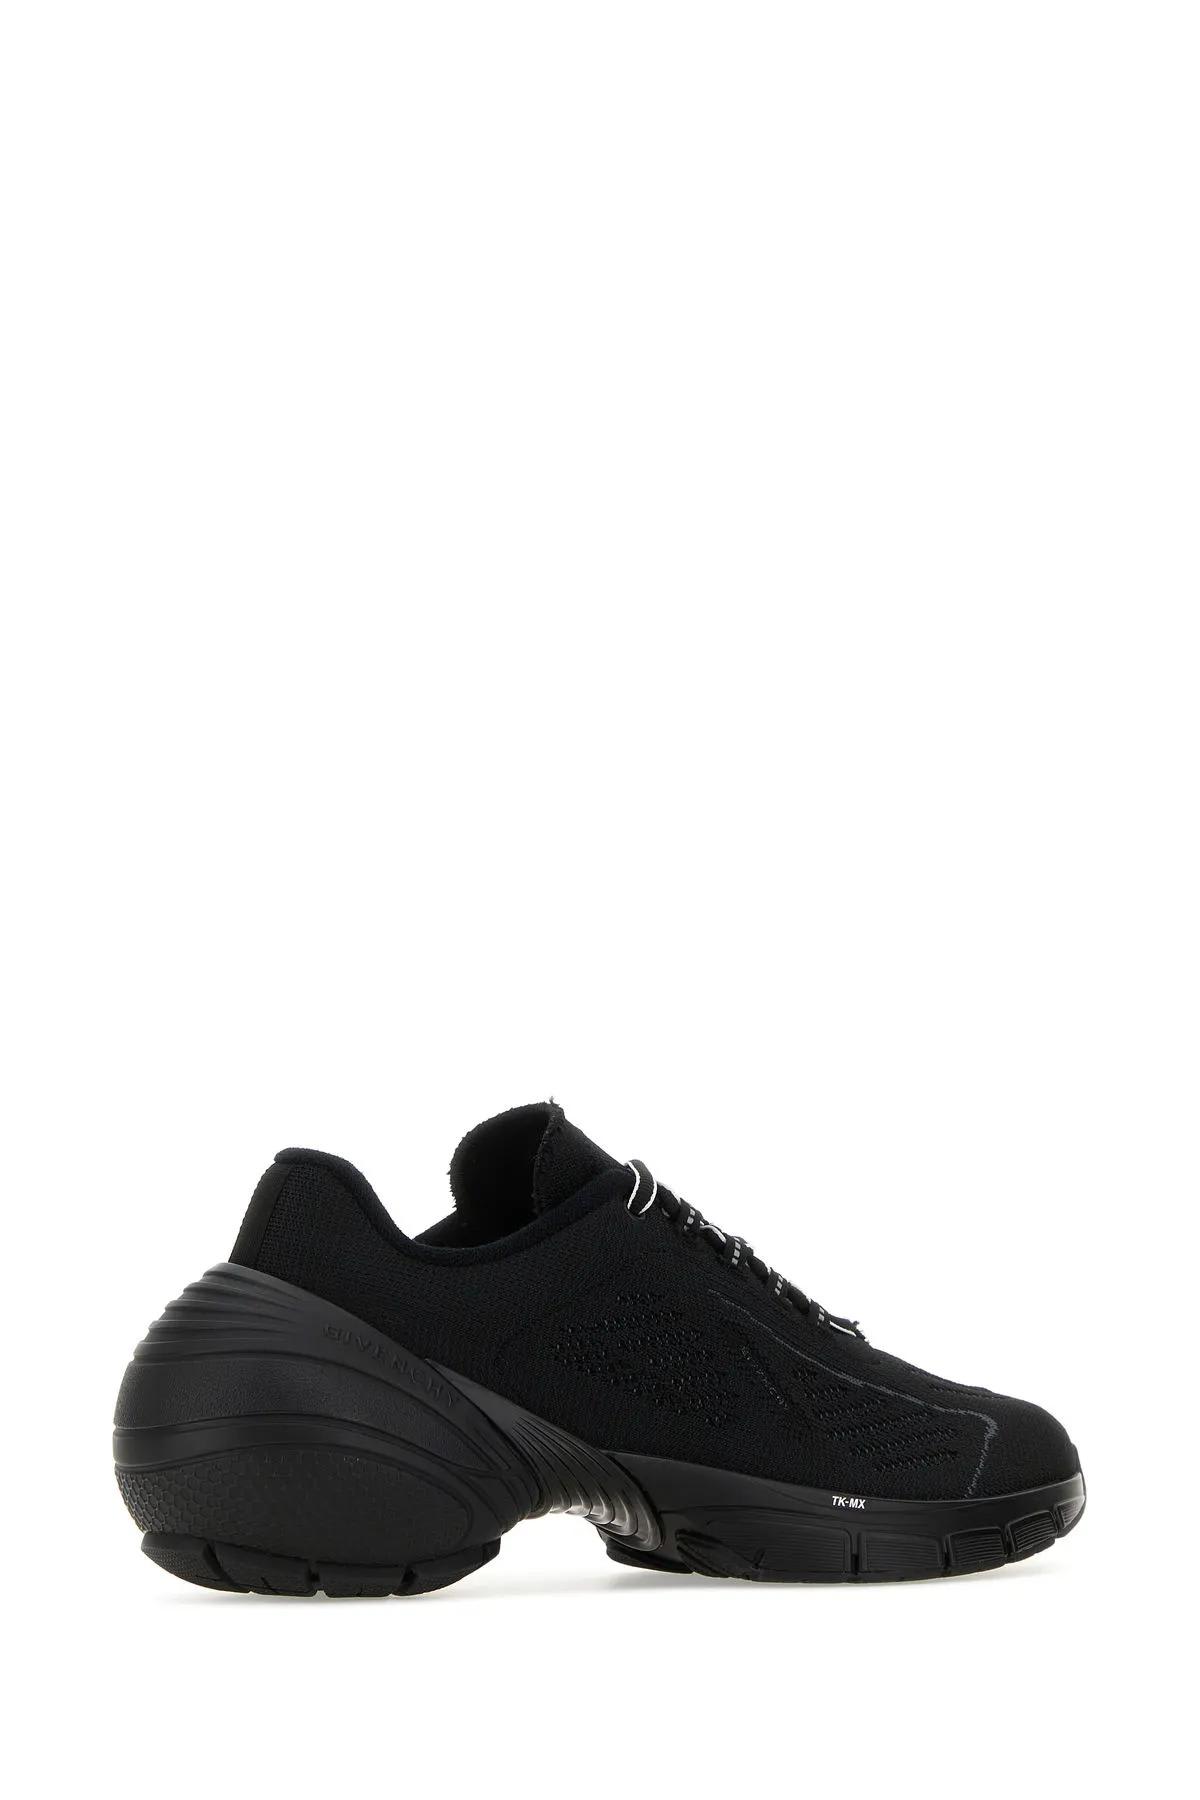 Shop Givenchy Black Fabric Tk-mx Sneakers